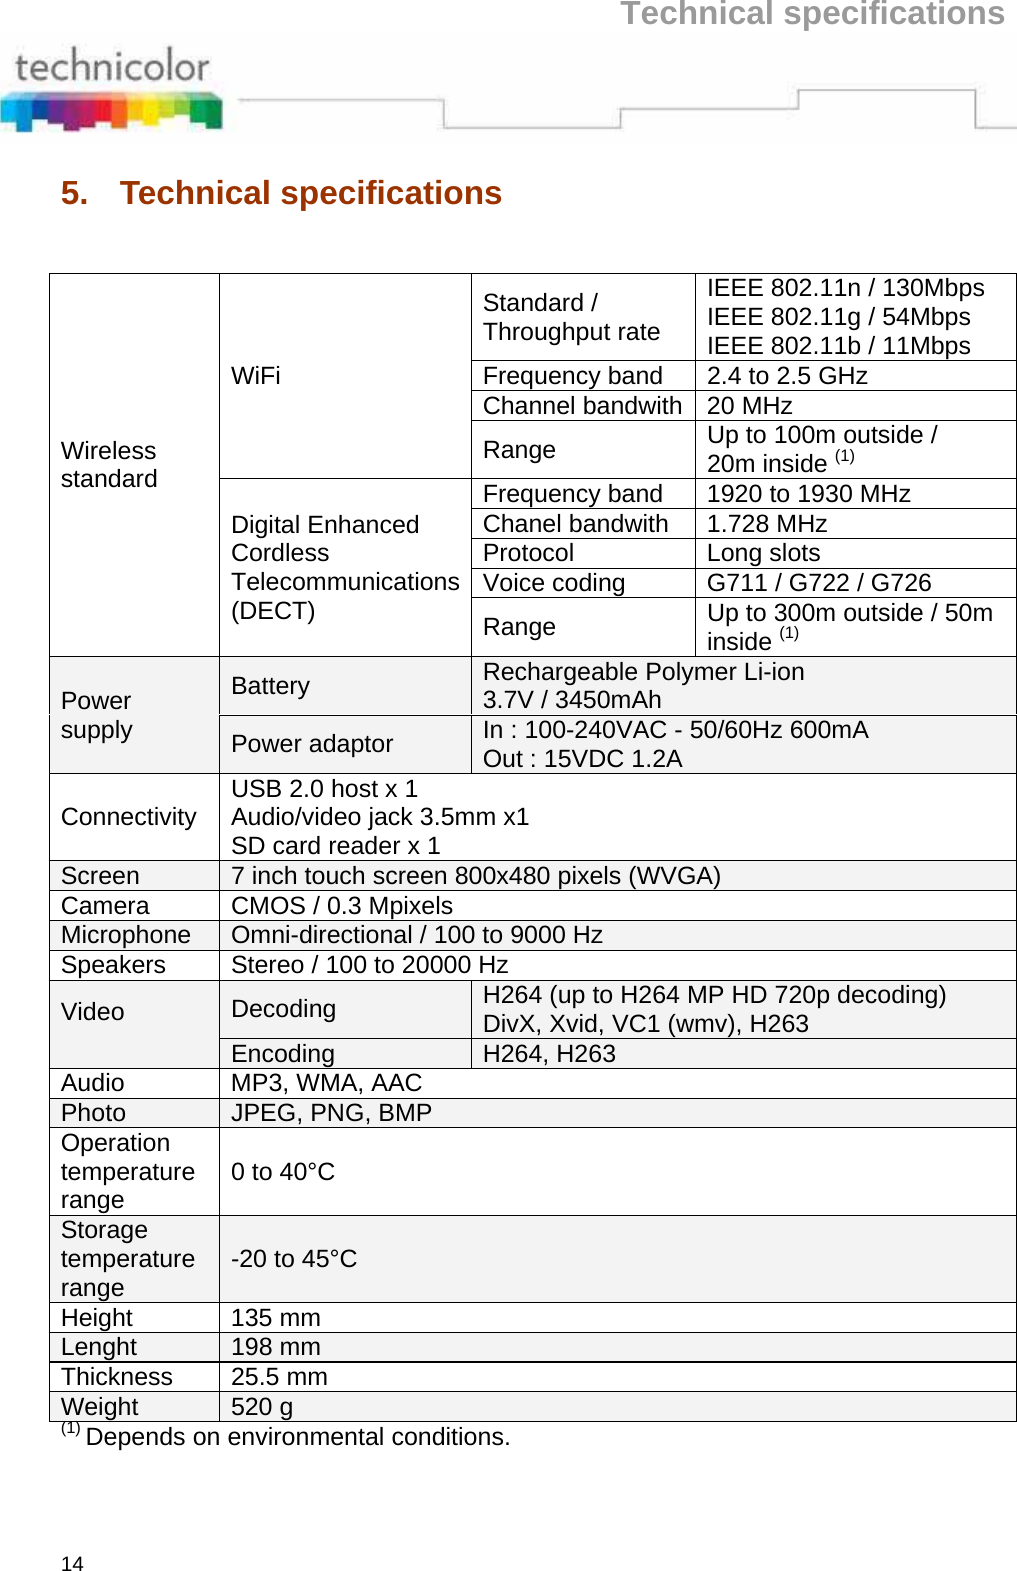 Technical specifications 14 5. Technical specifications    Wireless standard WiFi Standard / Throughput rate IEEE 802.11n / 130Mbps IEEE 802.11g / 54Mbps IEEE 802.11b / 11Mbps Frequency band  2.4 to 2.5 GHz Channel bandwith 20 MHz Range  Up to 100m outside /  20m inside (1) Digital Enhanced Cordless Telecommunications (DECT) Frequency band  1920 to 1930 MHz Chanel bandwith  1.728 MHz Protocol Long slots Voice coding  G711 / G722 / G726 Range  Up to 300m outside / 50m inside (1) Power supply Battery  Rechargeable Polymer Li-ion 3.7V / 3450mAh Power adaptor  In : 100-240VAC - 50/60Hz 600mA Out : 15VDC 1.2A Connectivity  USB 2.0 host x 1 Audio/video jack 3.5mm x1 SD card reader x 1 Screen  7 inch touch screen 800x480 pixels (WVGA) Camera  CMOS / 0.3 Mpixels Microphone  Omni-directional / 100 to 9000 Hz Speakers  Stereo / 100 to 20000 Hz Video  Decoding  H264 (up to H264 MP HD 720p decoding) DivX, Xvid, VC1 (wmv), H263 Encoding  H264, H263 Audio  MP3, WMA, AAC Photo  JPEG, PNG, BMP Operation temperature range  0 to 40°C Storage temperature range  -20 to 45°C Height 135 mm Lenght  198 mm Thickness 25.5 mm Weight  520 g (1) Depends on environmental conditions.